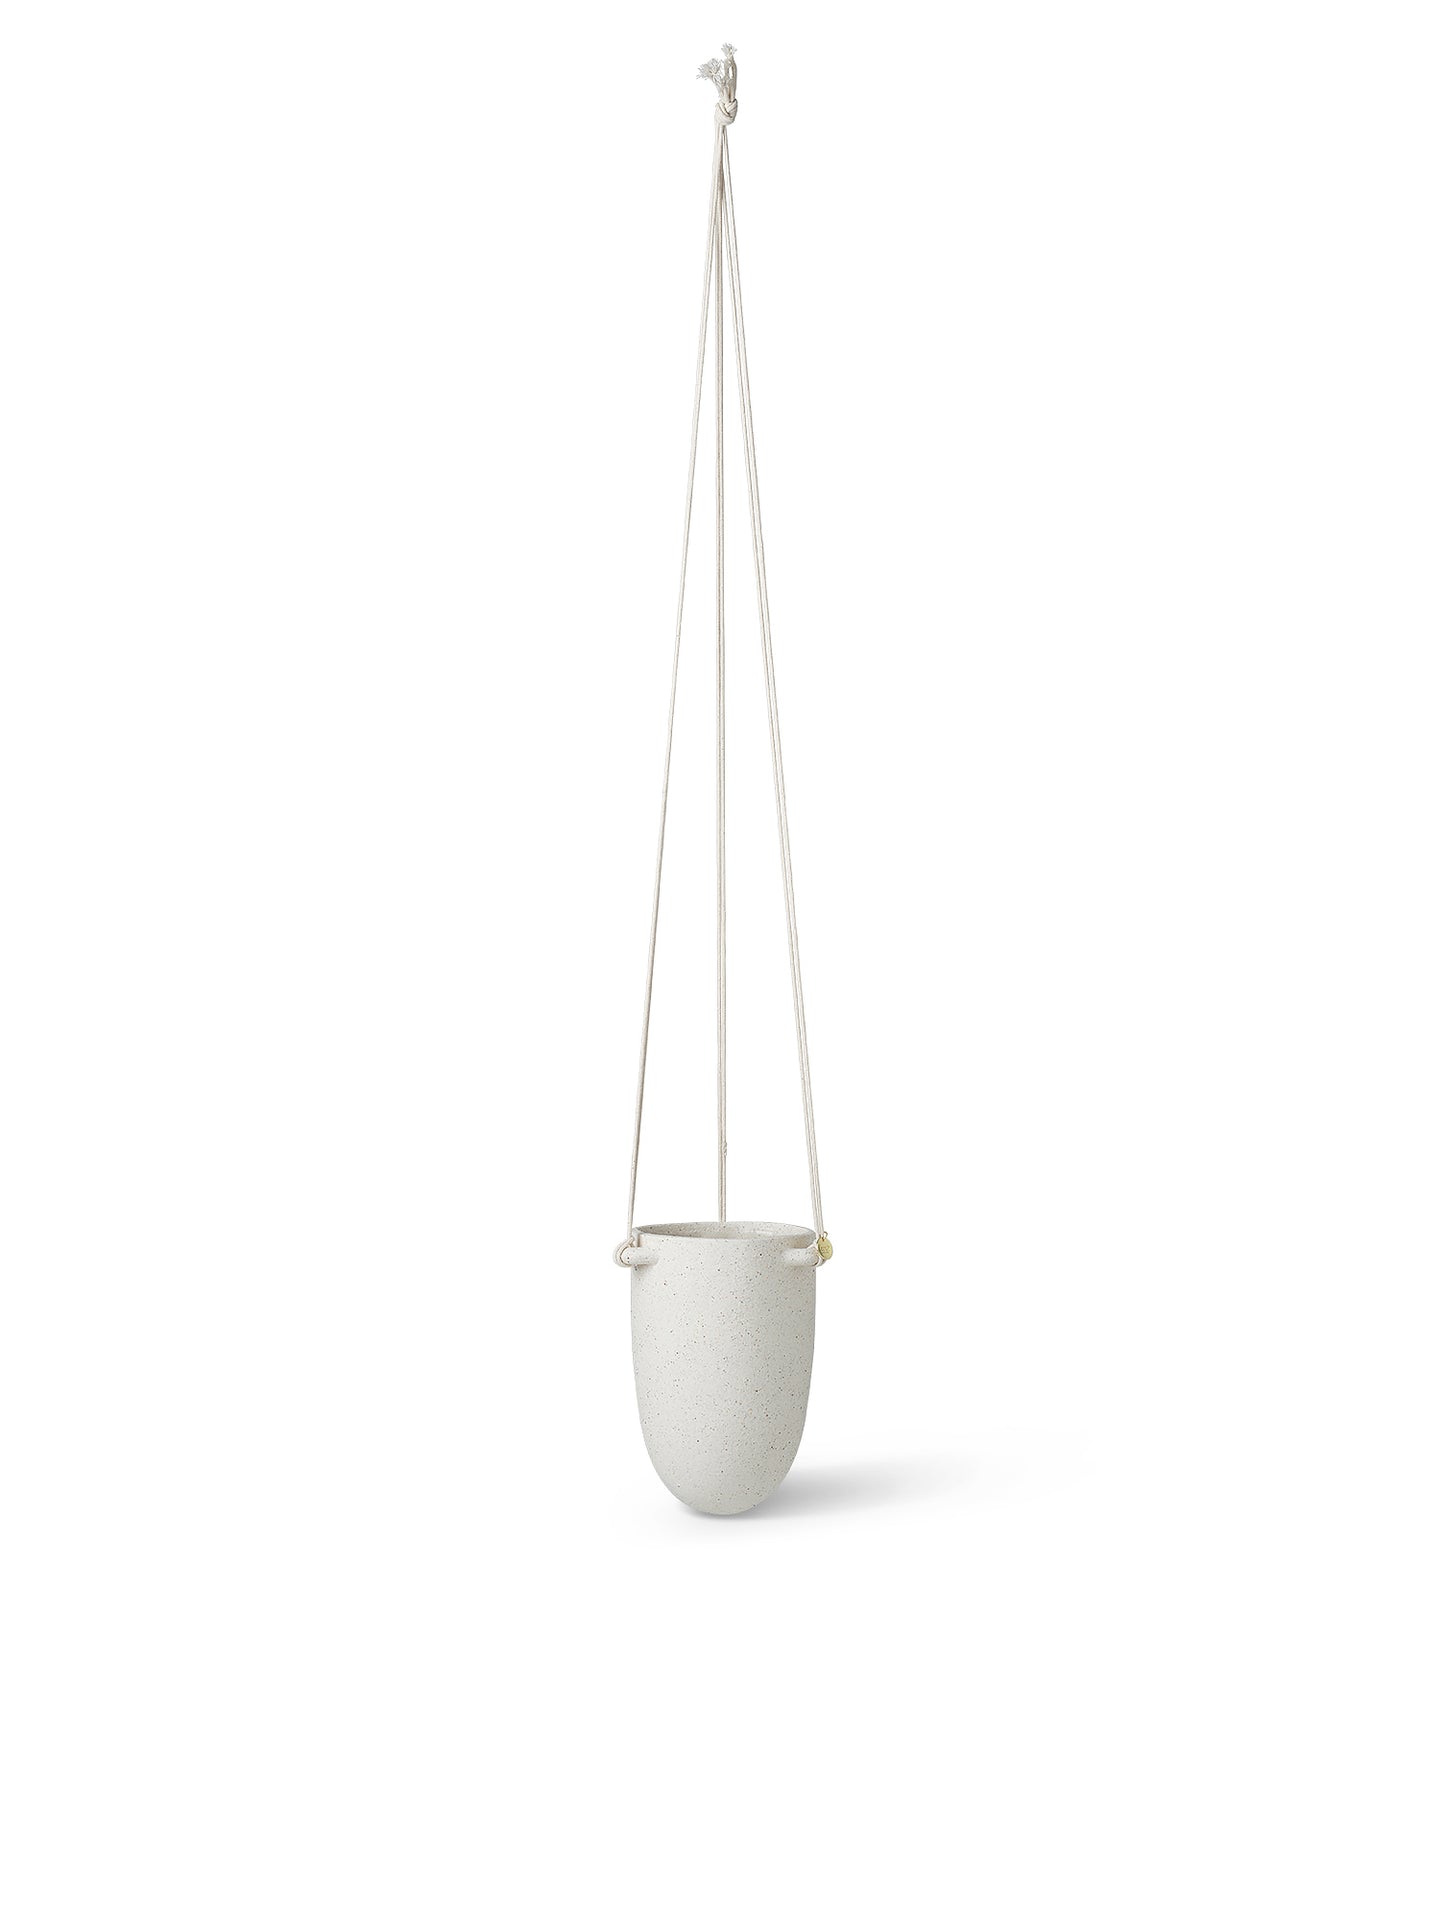 Small Speckle Hanging Pot in Off-White by Ferm Living